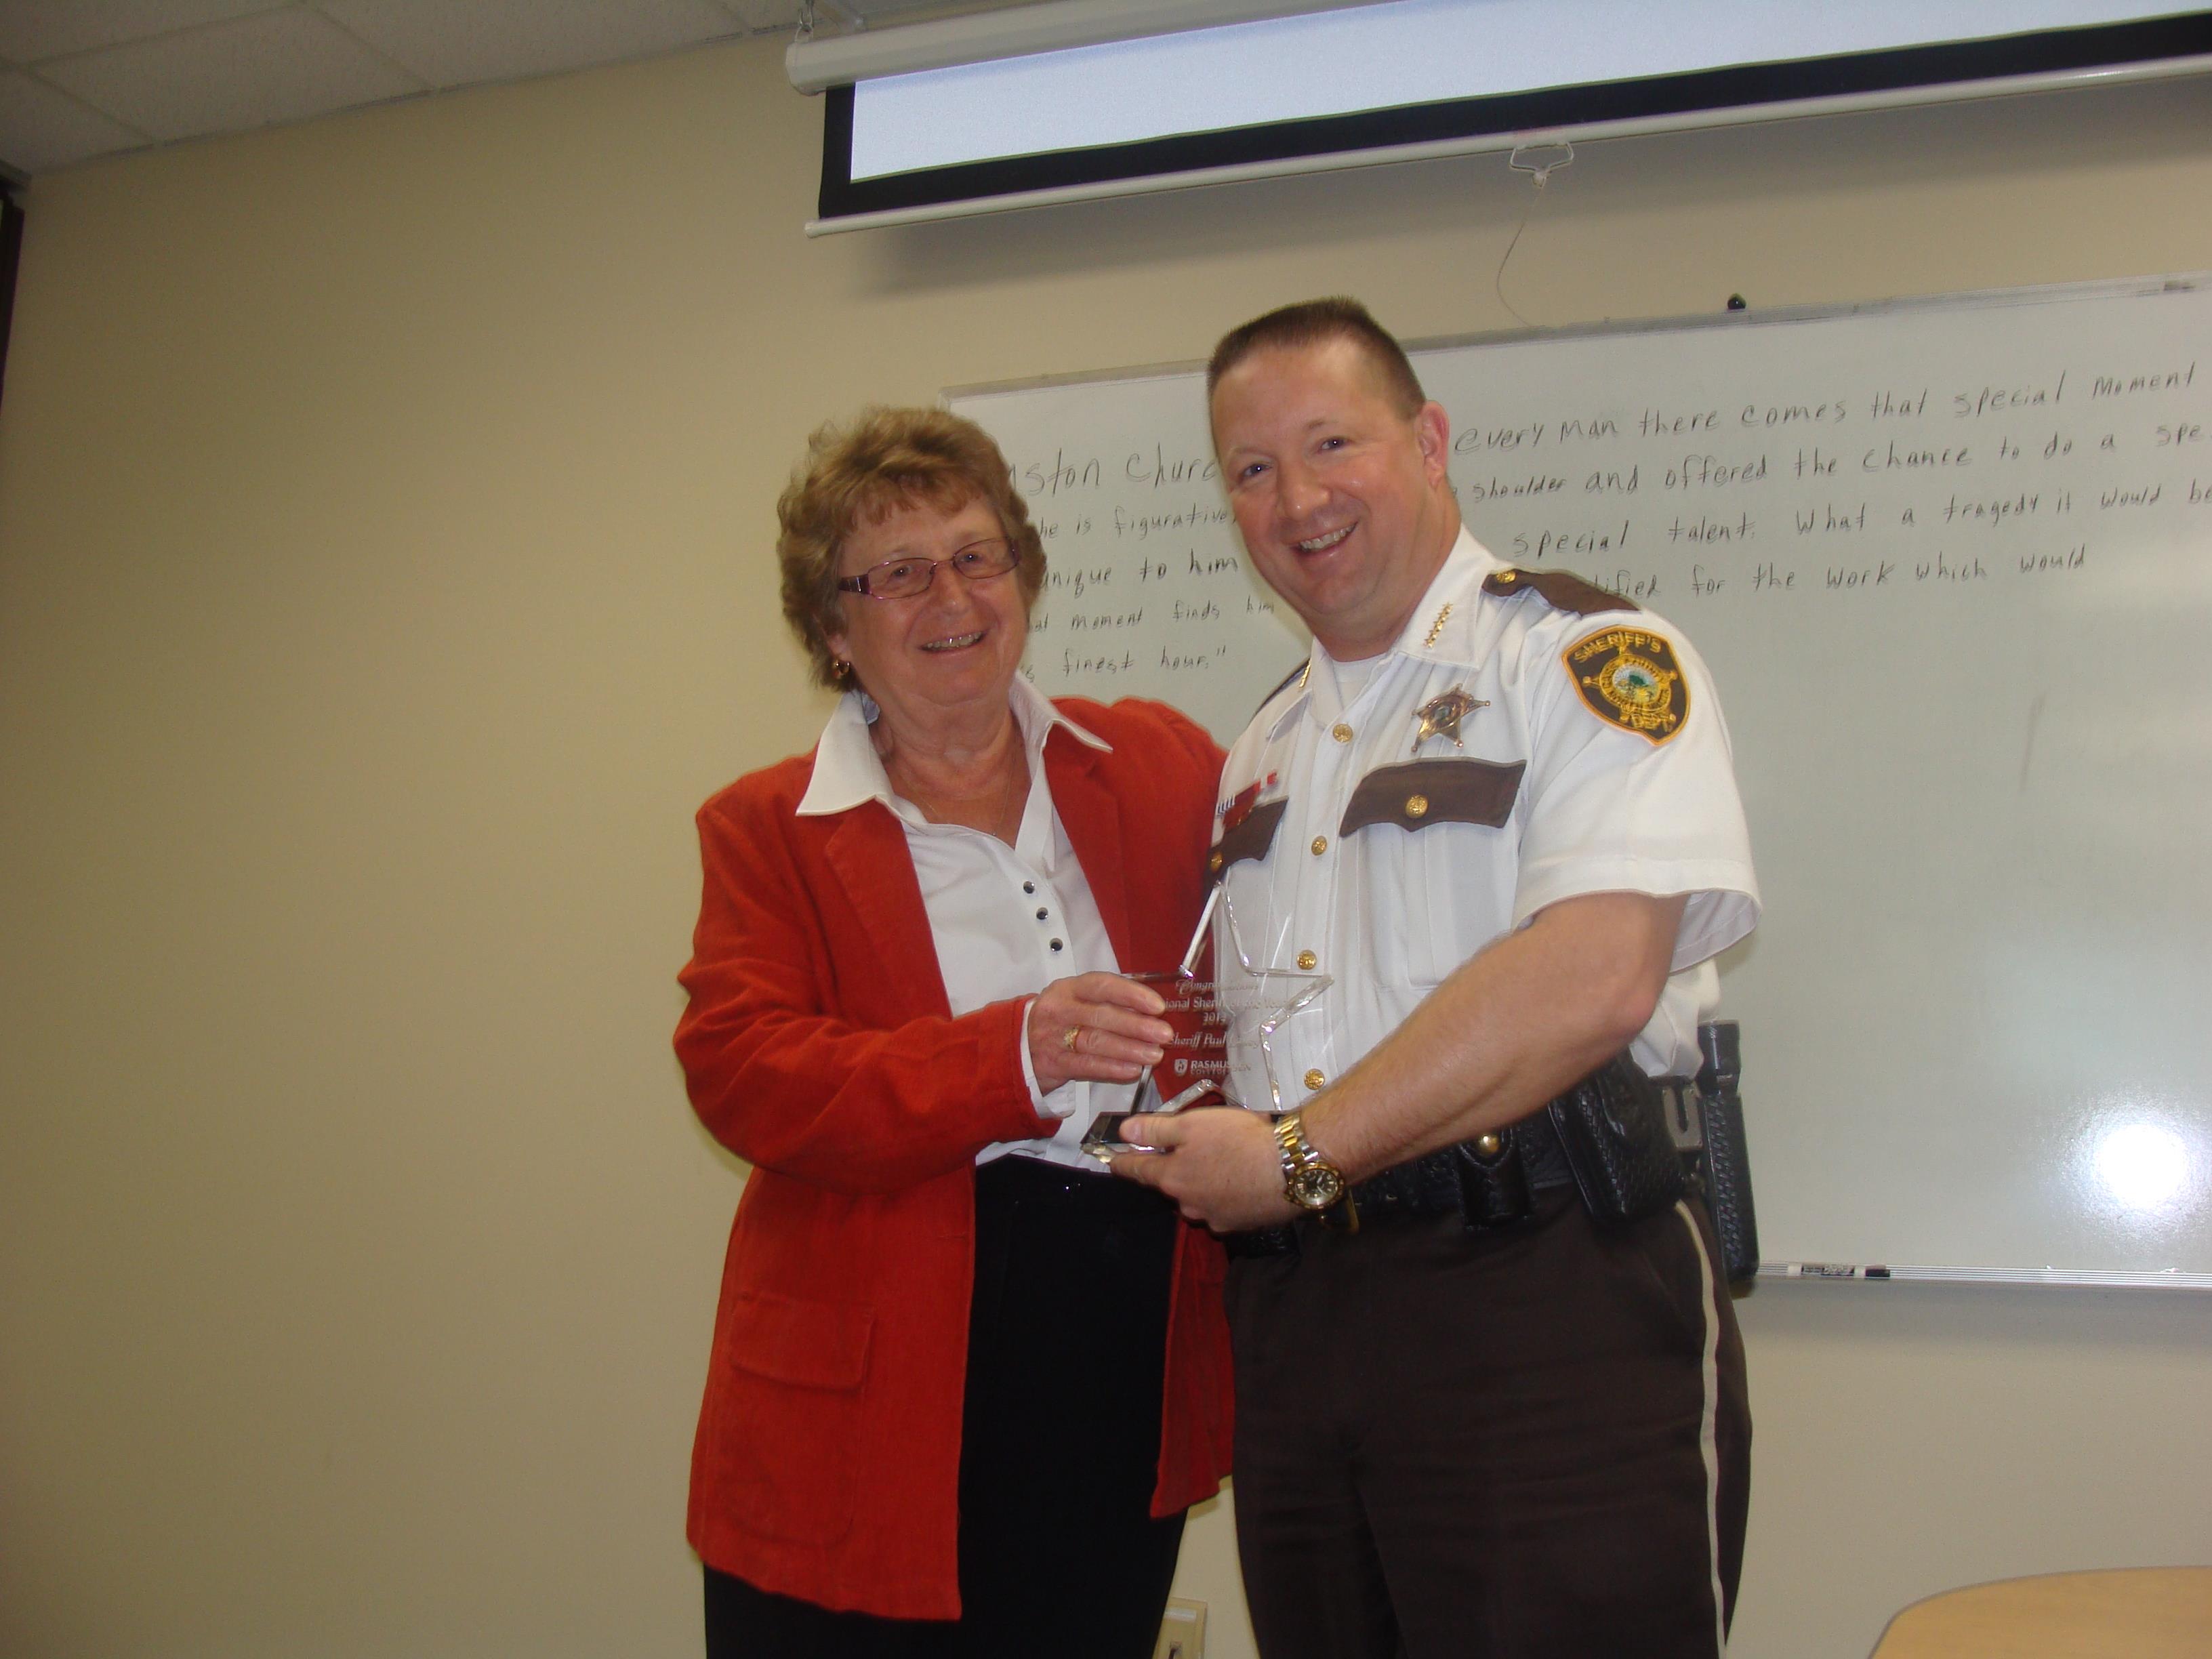 Sheriff Paul Laney honored for contributions to the Fargo-Moorhead community